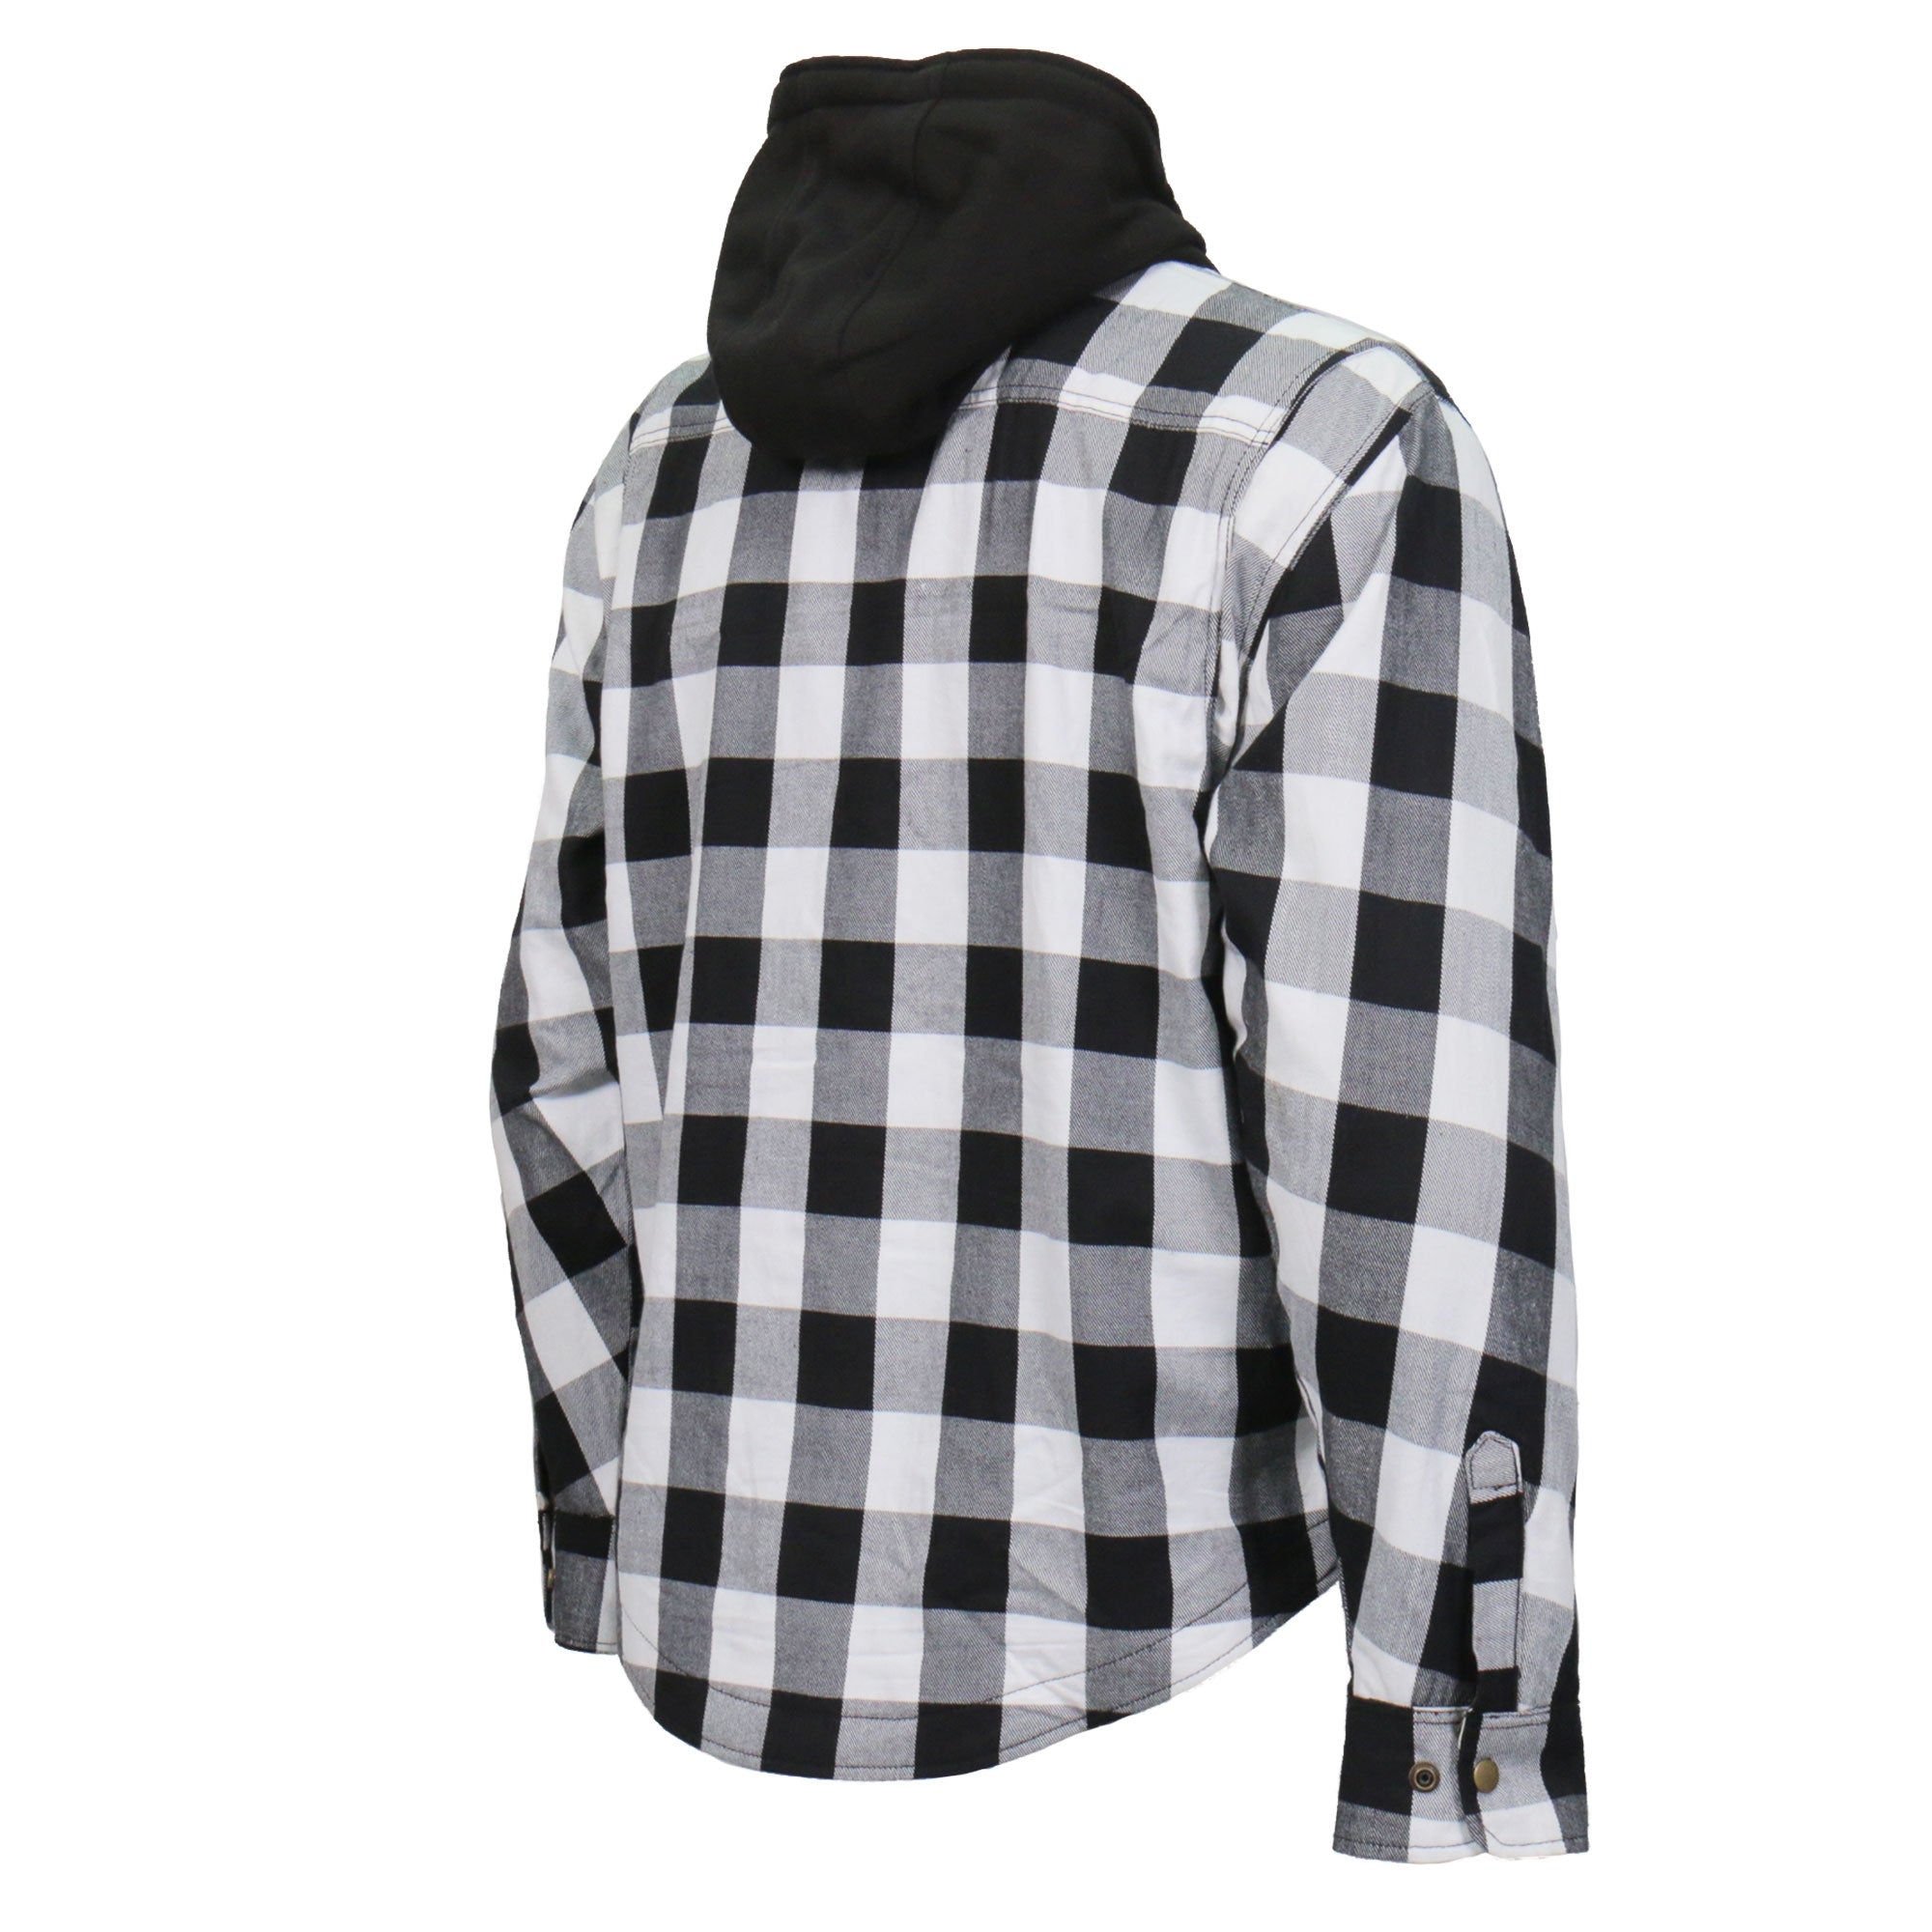 Hot Leathers JKM3006 Men’s Motorcycle Black and White Hooded Armored Flannel Biker Jacket